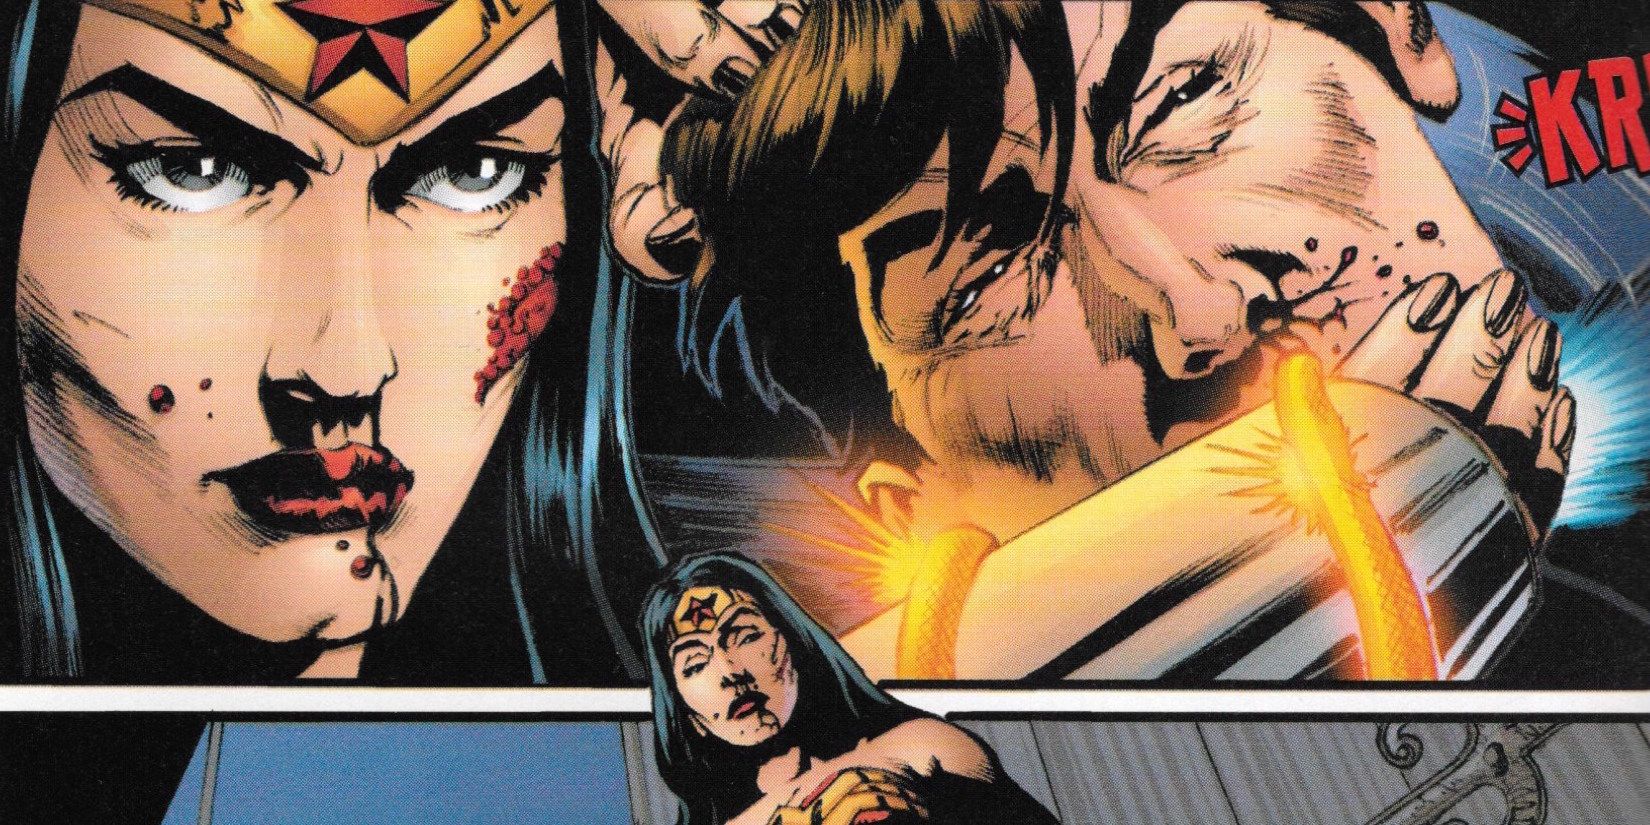 Wonder Woman snapping Max Lord's nek and killing him in DC Comics